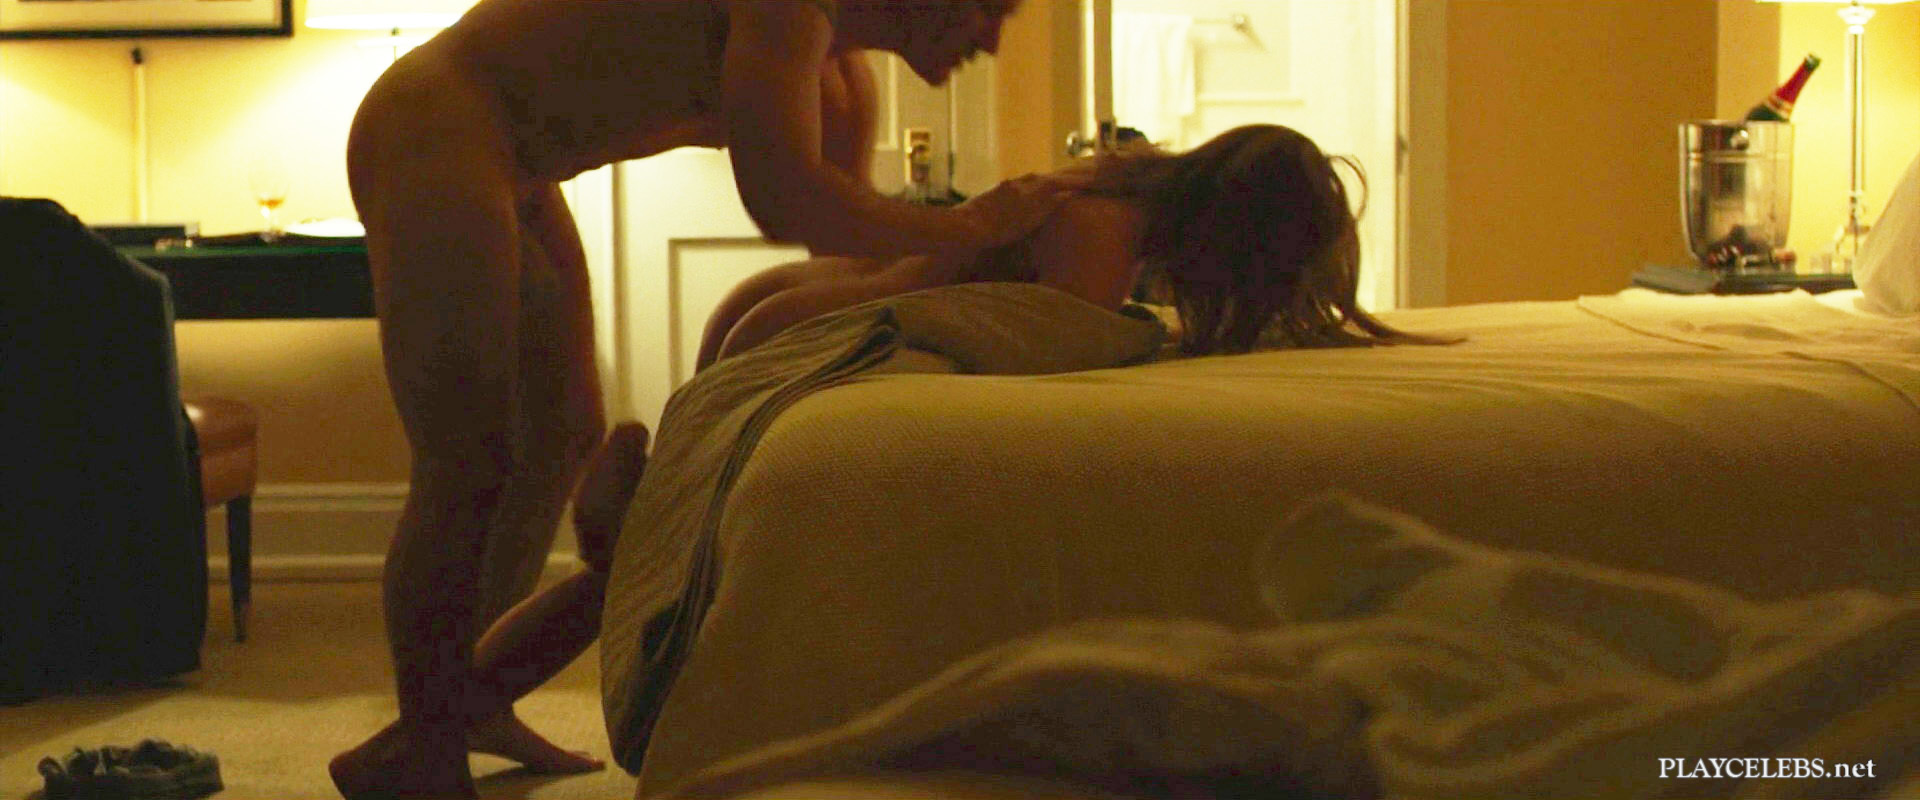 Reese witherspoon nude scene wild